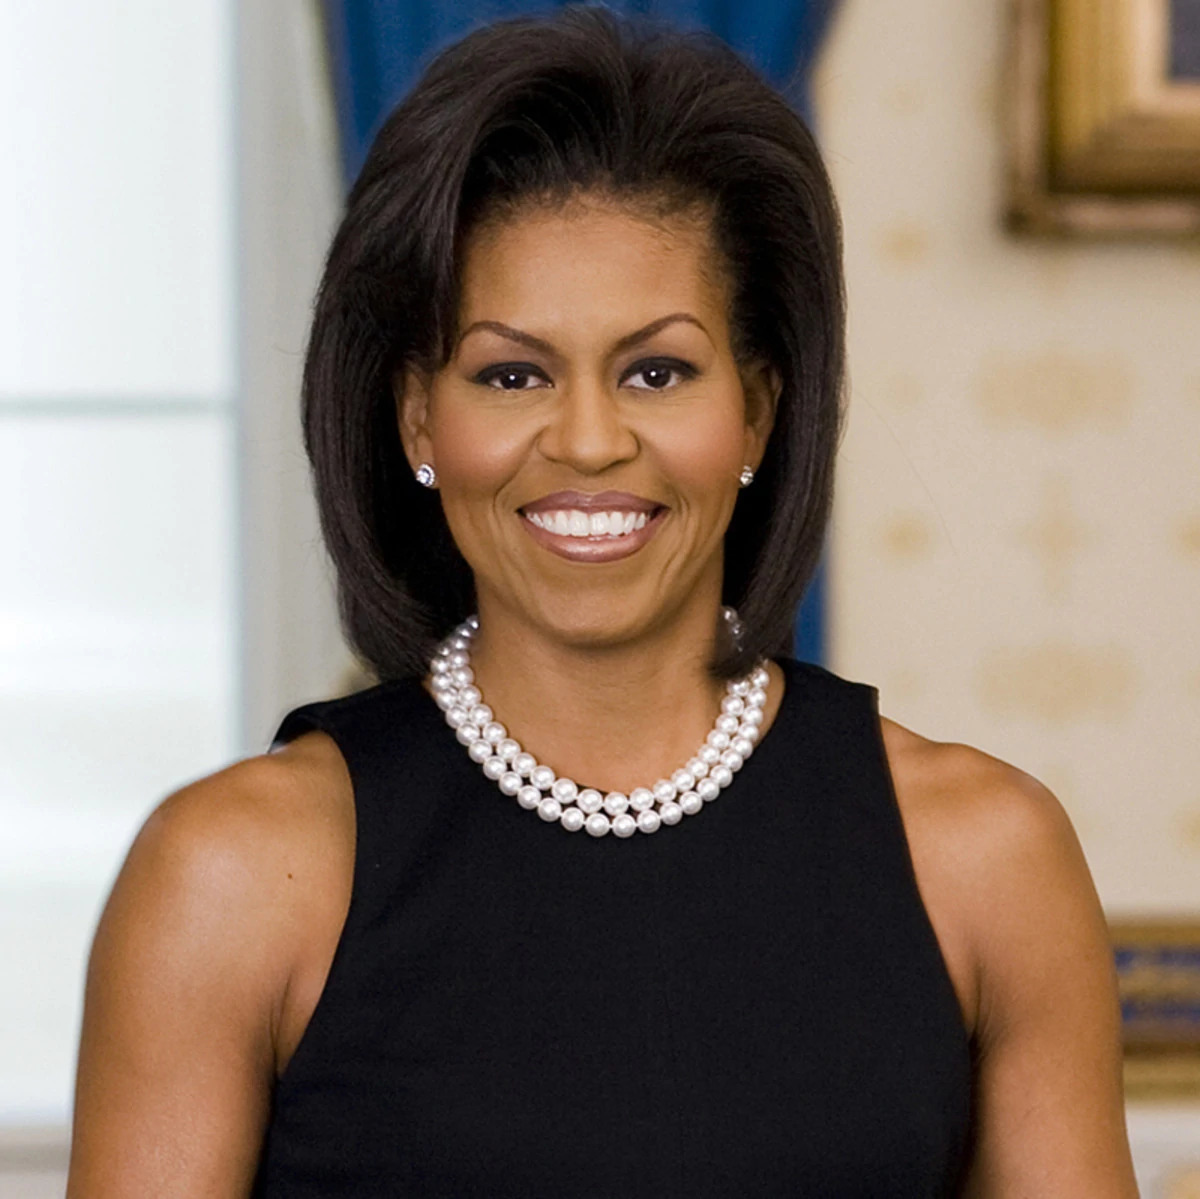 Michelle+Obama%2C+for+example%2C+is+one+of+the+most+respectable+people+of+the+21st+century%2C+and+she+utilizes+all+the+tips+I+mentioned+above.+